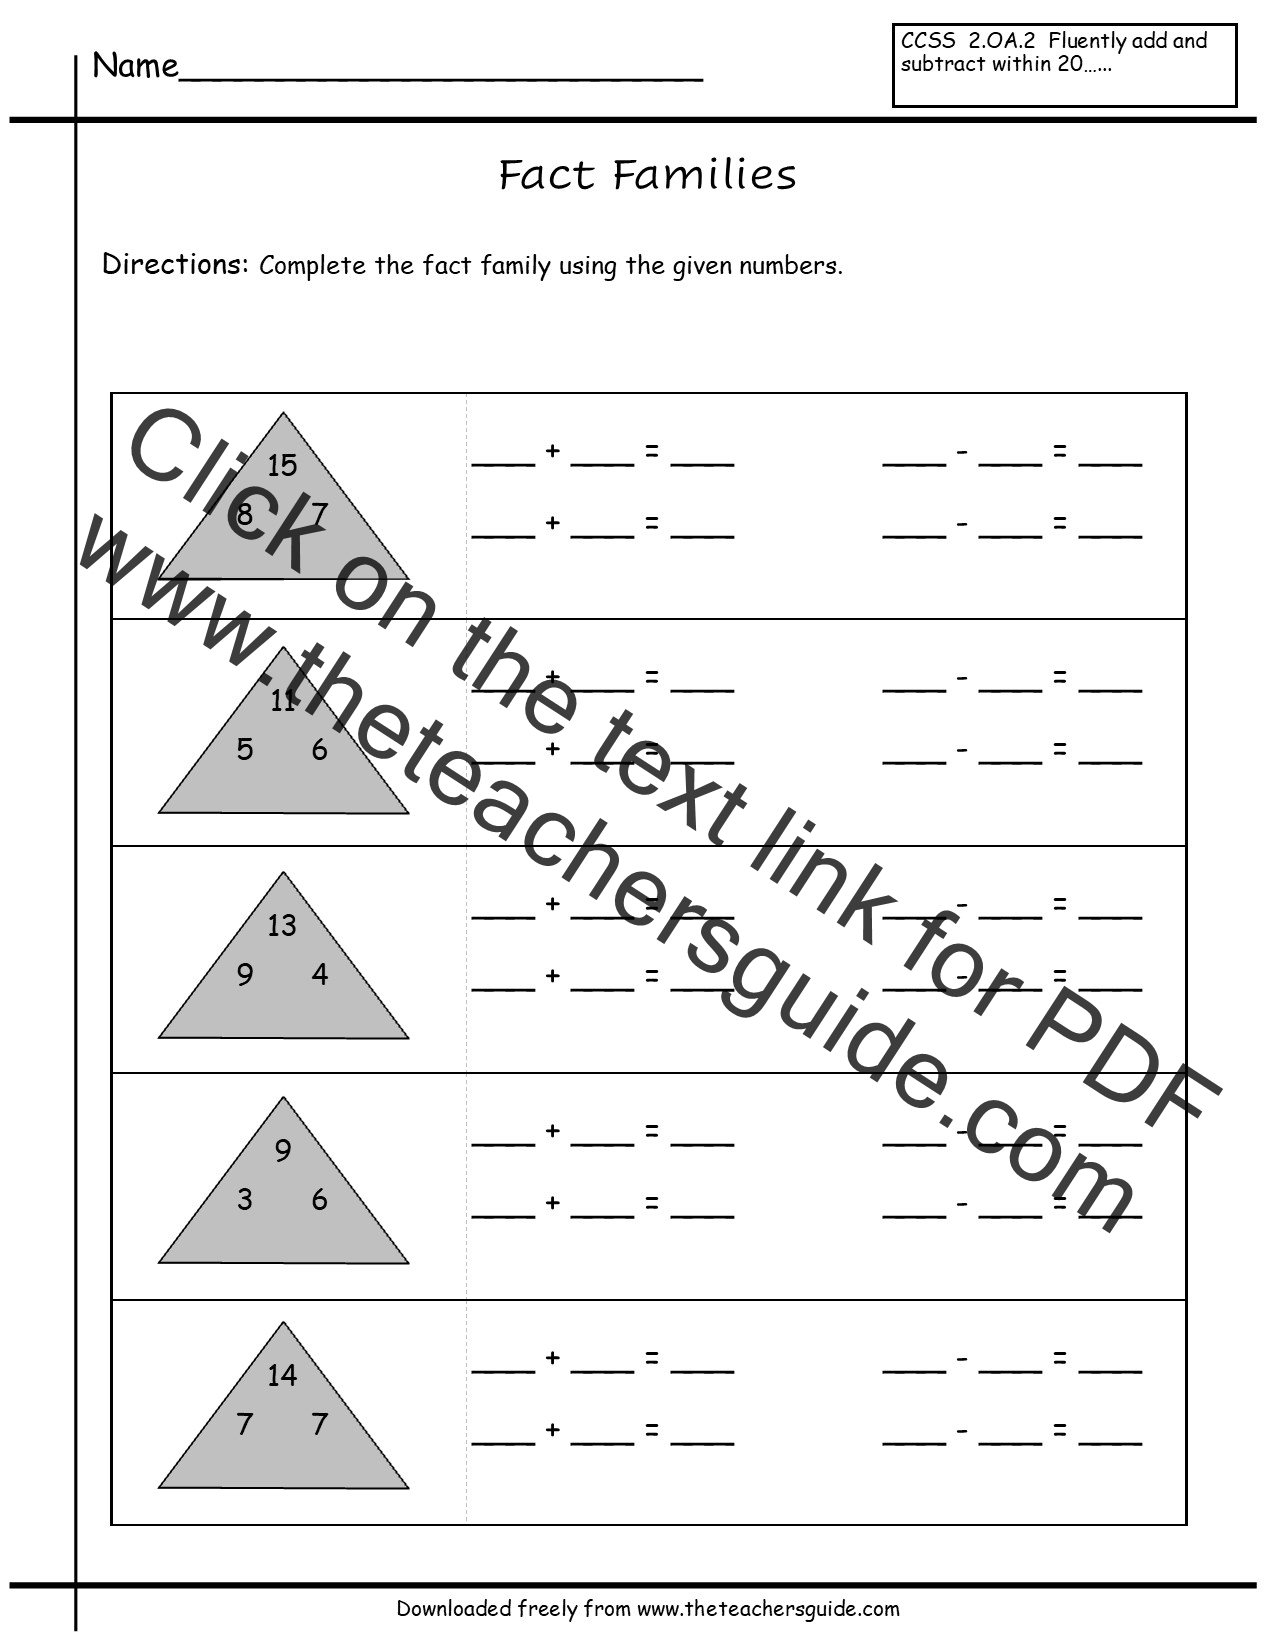 Comparing Numbers Worksheets from The Teacher's Guide